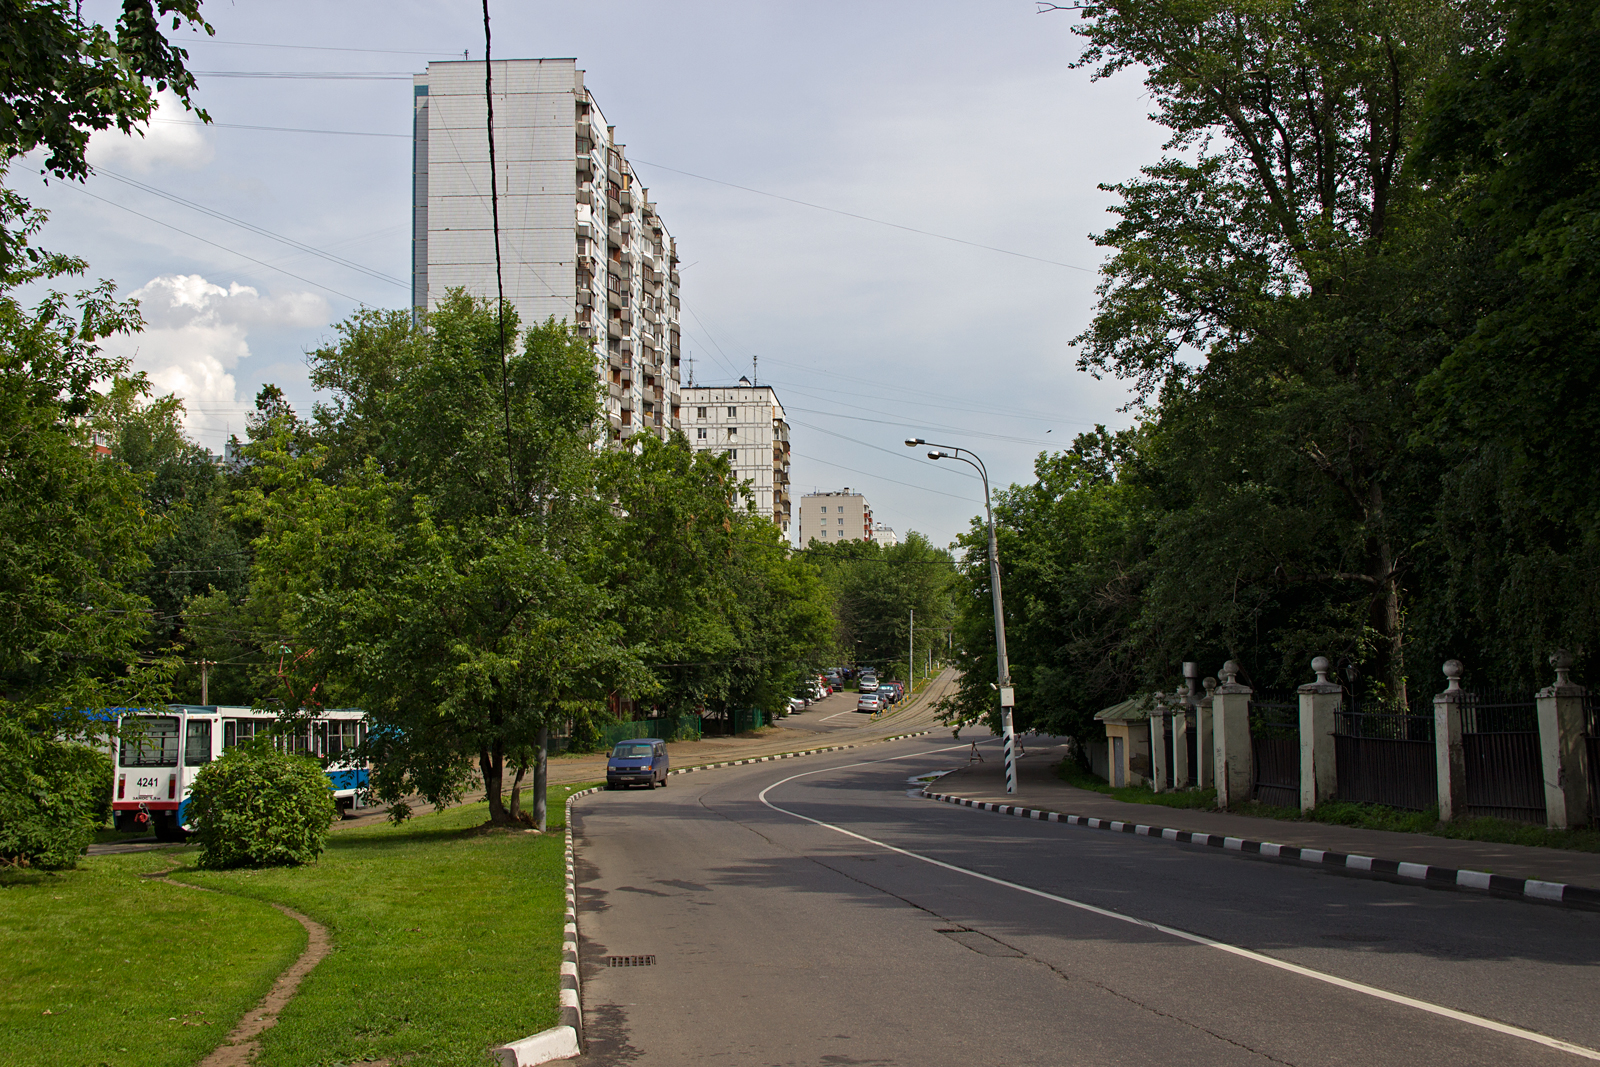 a long stretch of road in front of tall buildings